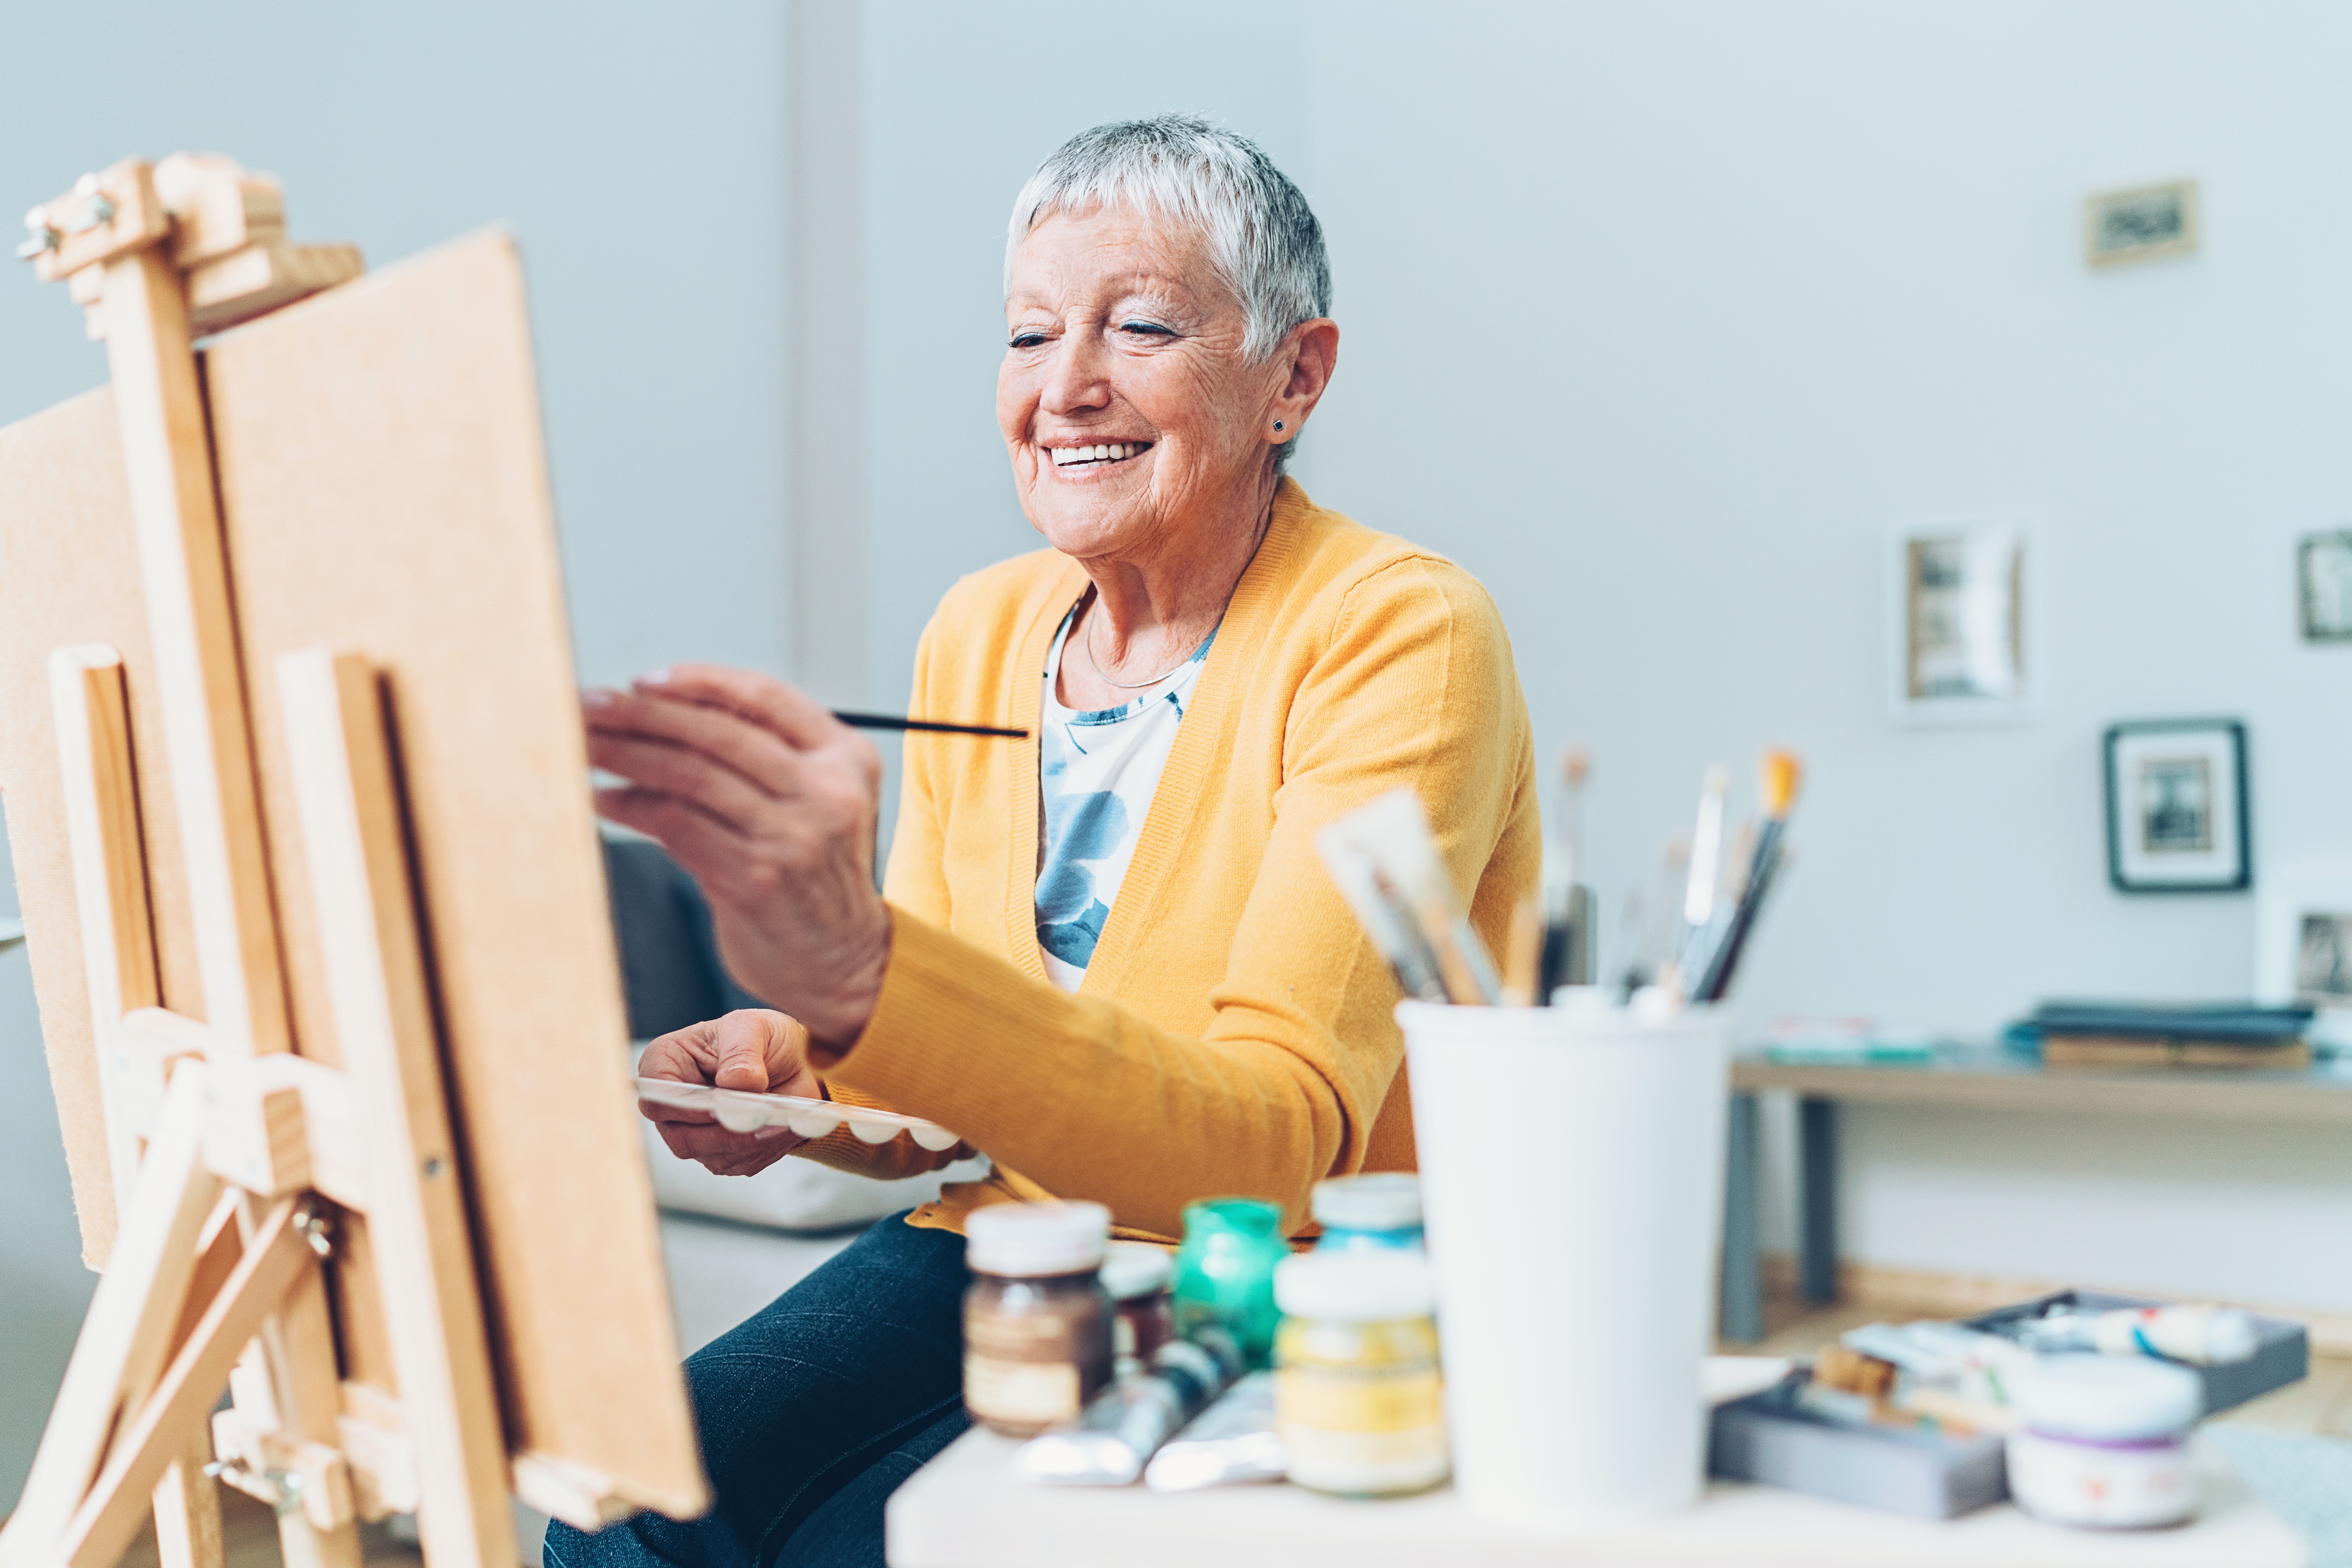 Senior with alzheimer's keeping active and engaged by painting in assisted living